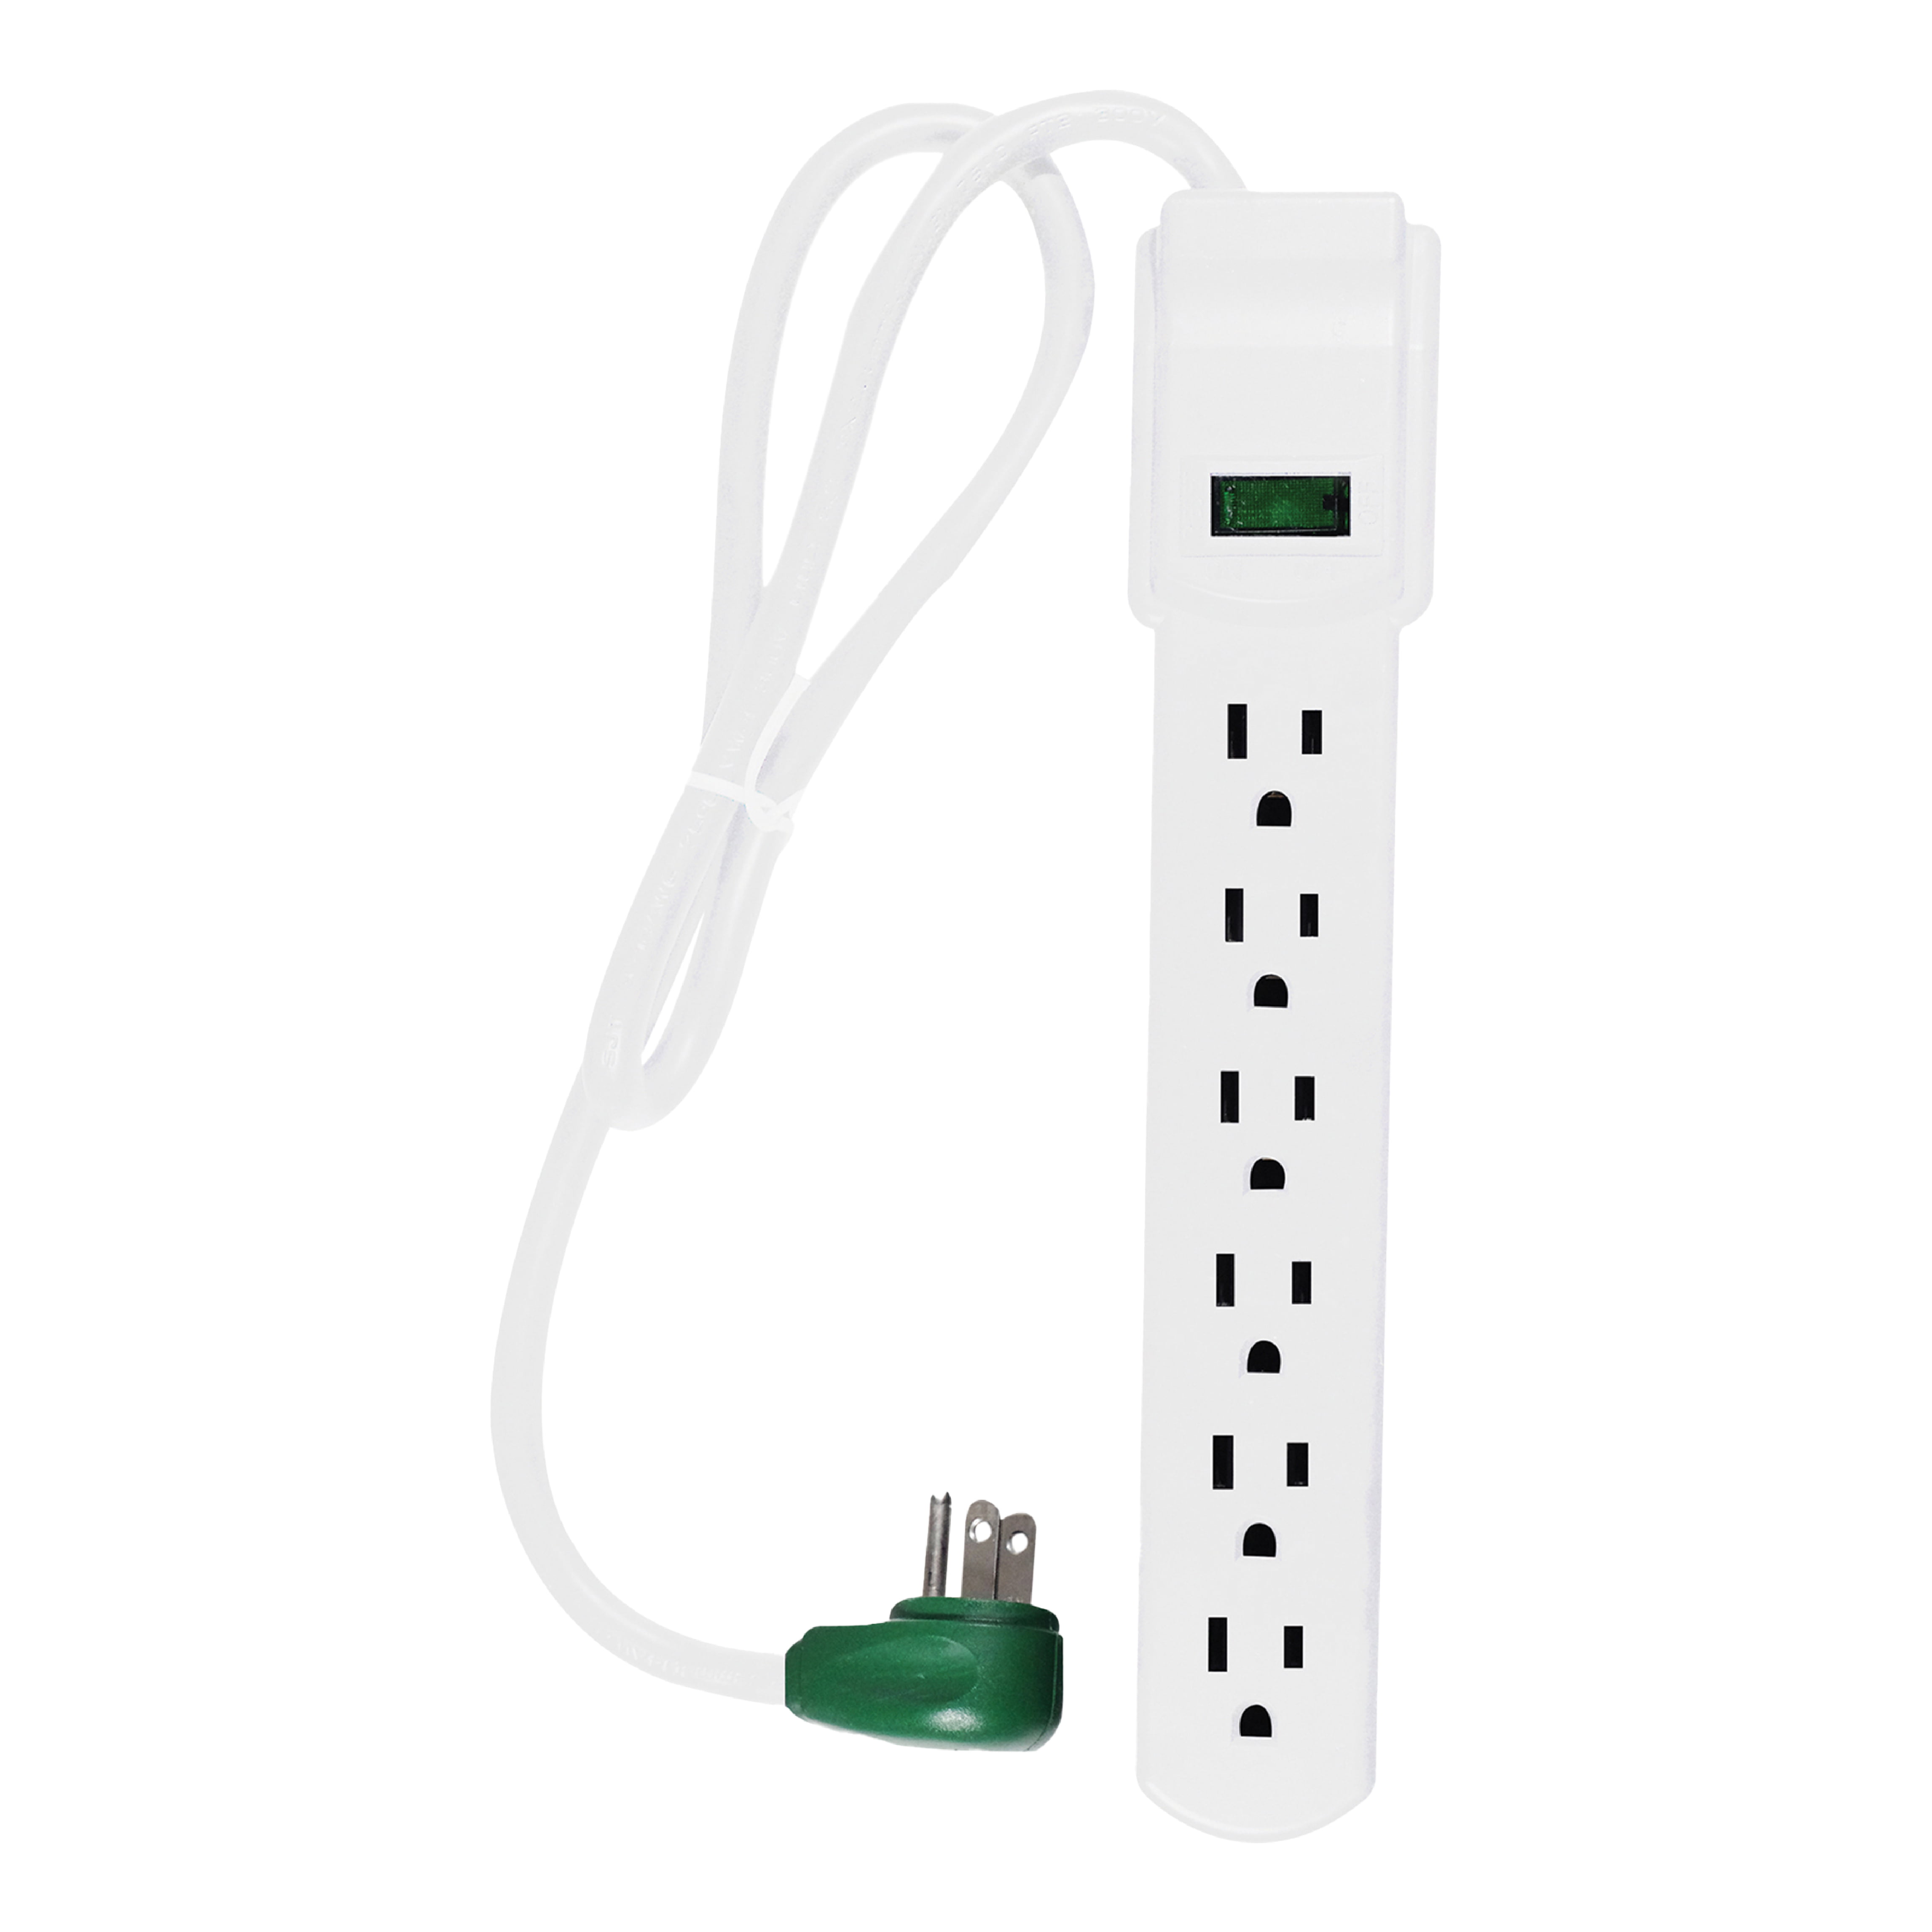 GoGreen Power GG-16103MS 6 Outlet Surge Protector w/ 2.5' Cord